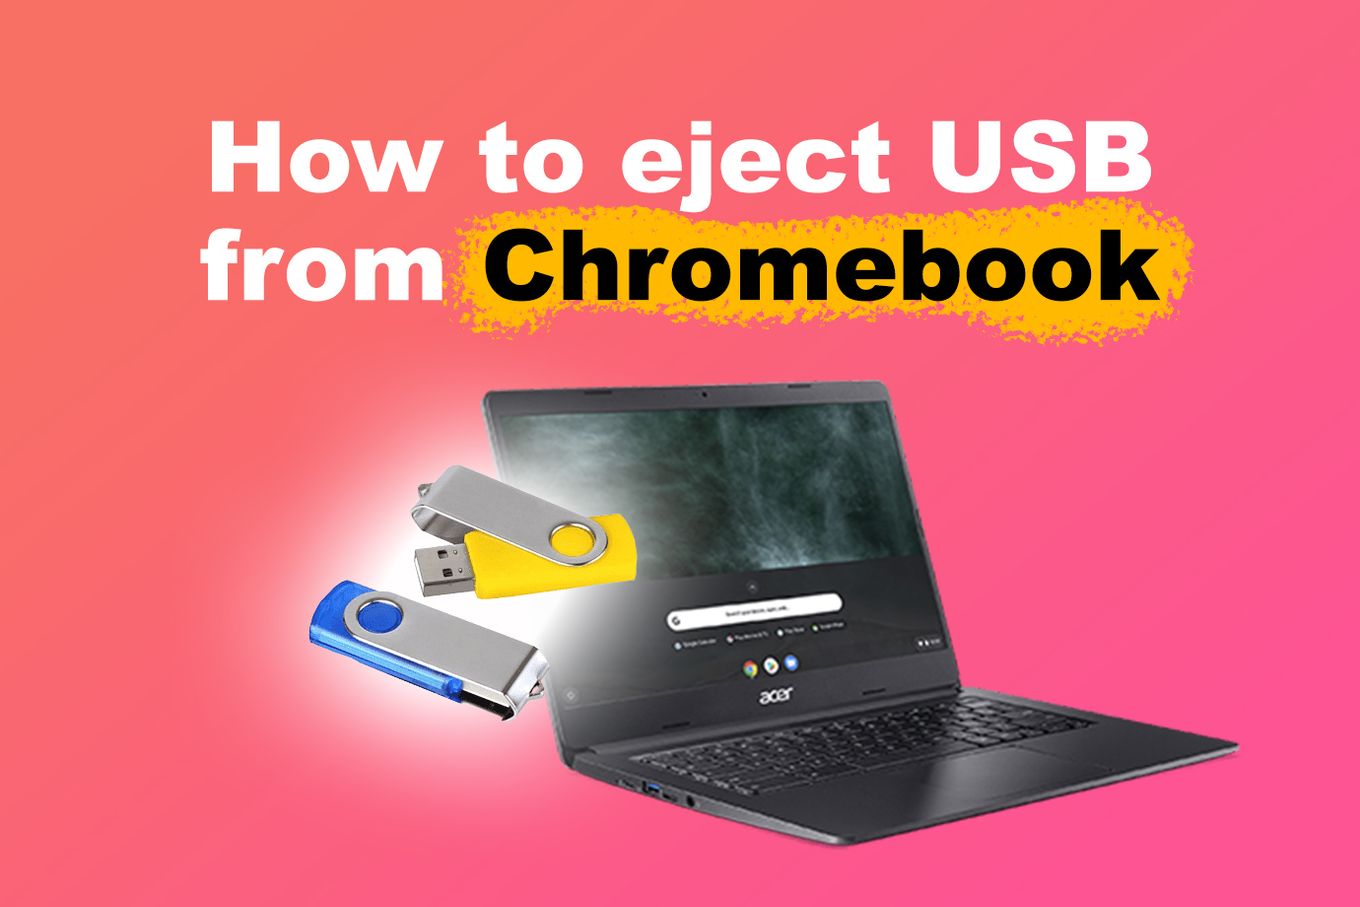 How to eject USB from Chromebook